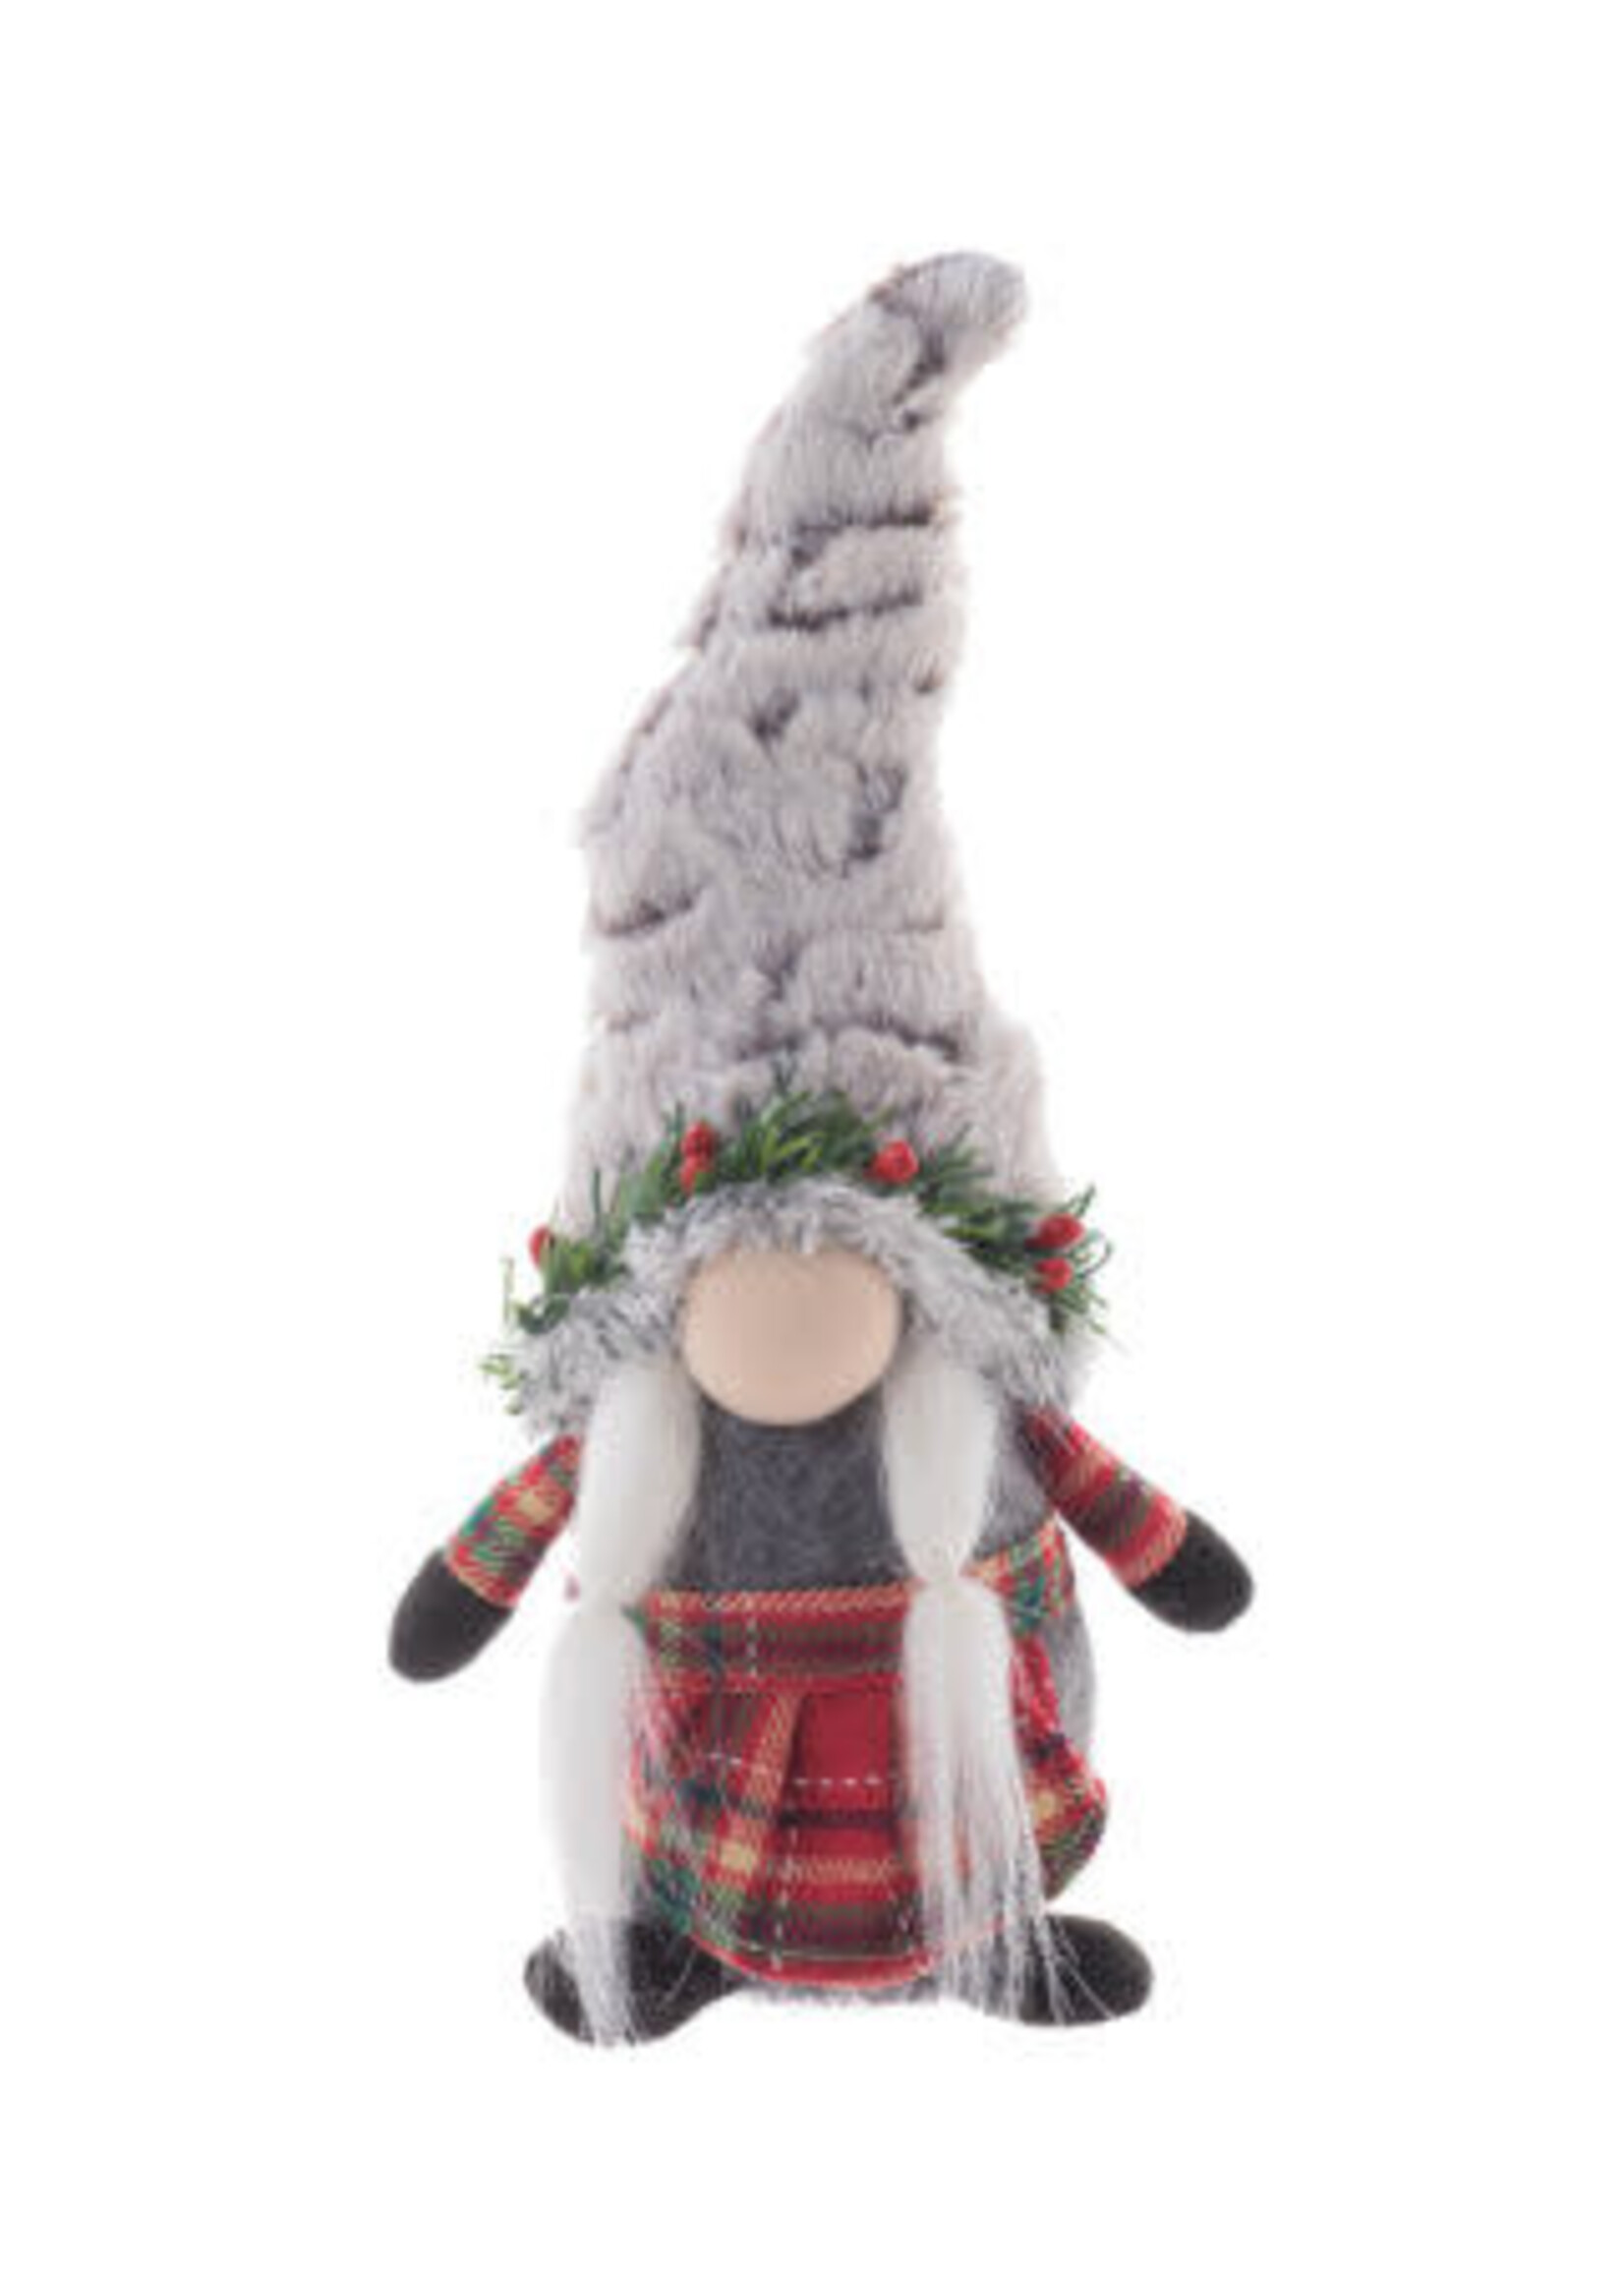 GREY/RED STANDING MOM GNOME WITH PIGTAILS